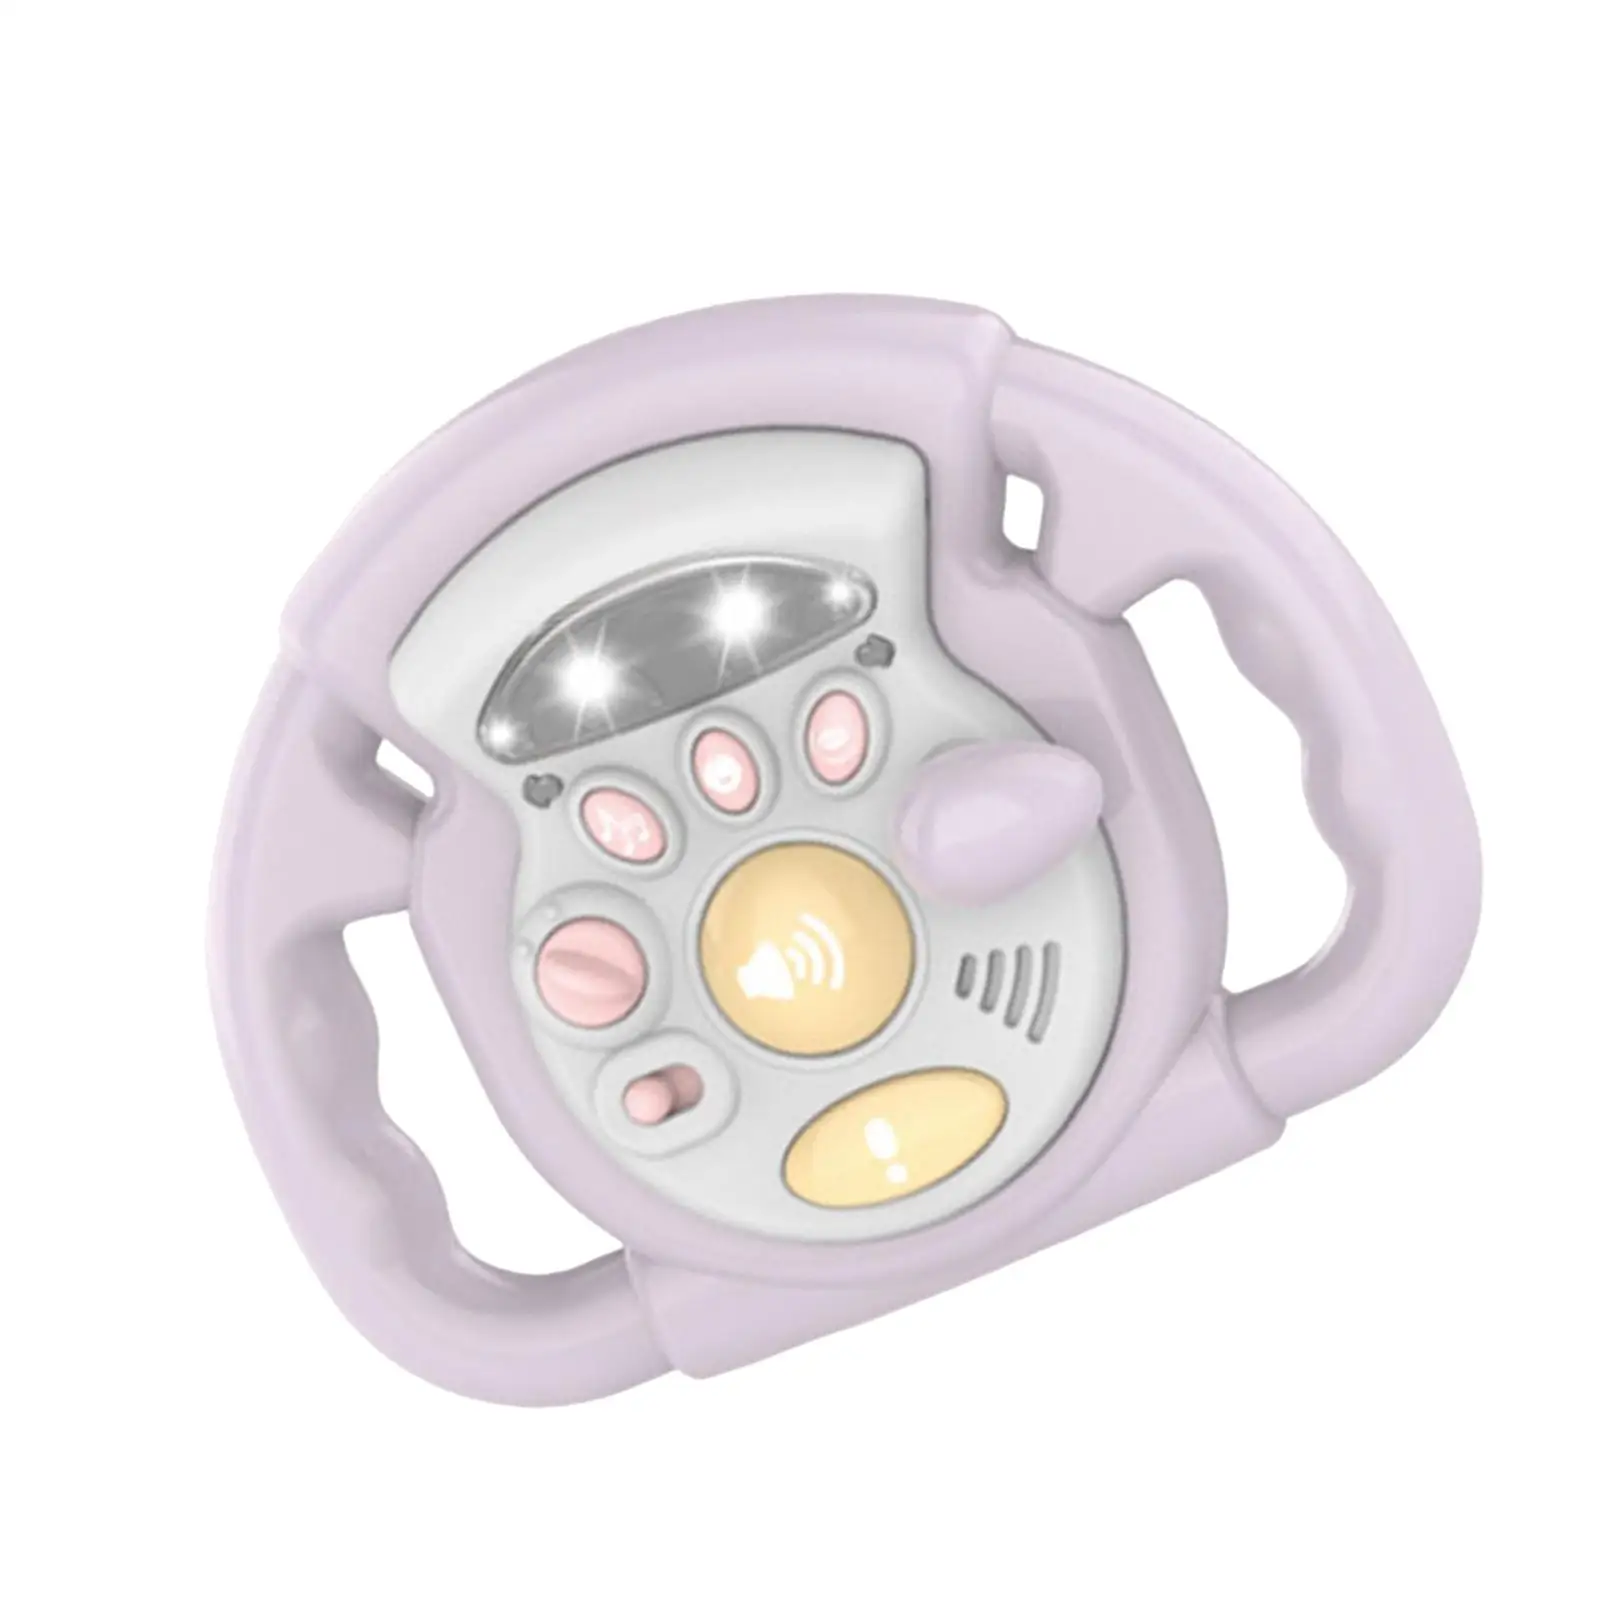 Multifunction Steering Wheel Toys Songs and Lights Driving Controller for Toddlers Children Girls Interactive Toy Education Toy